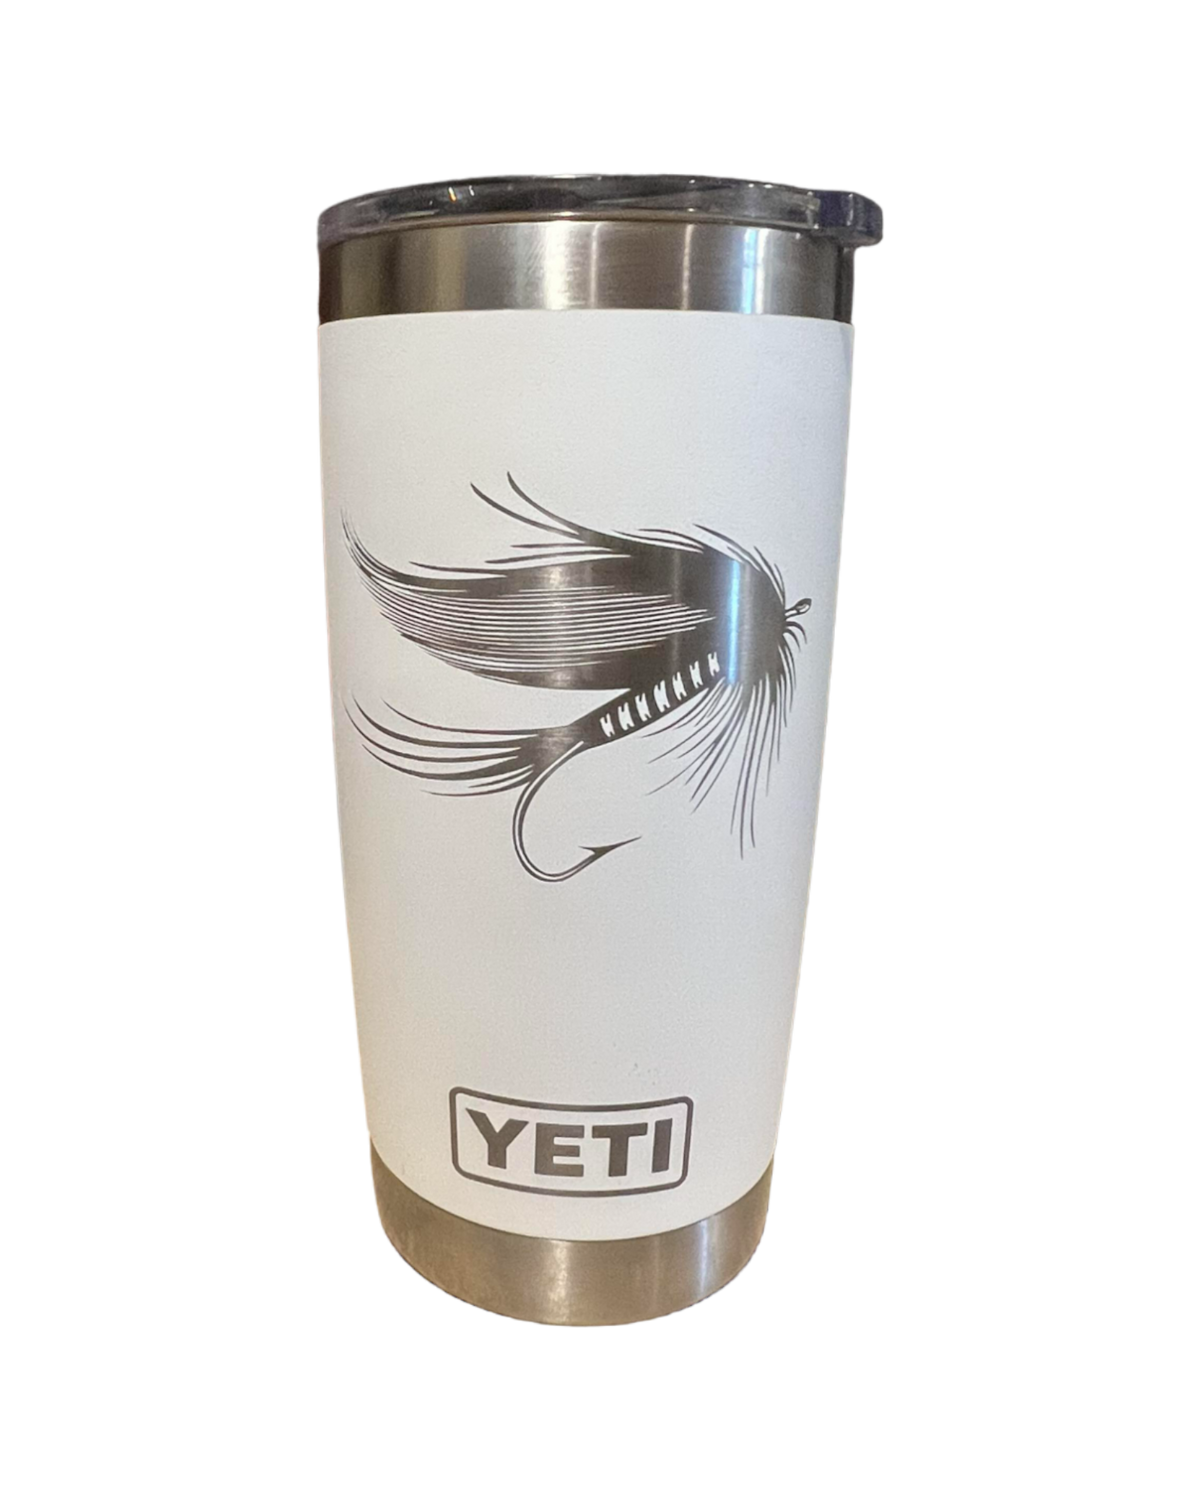 https://cdn.shopify.com/s/files/1/0606/5497/7184/files/wind_river_outpost_fly_fishing_yeti_white_1200x.png?v=1690329006